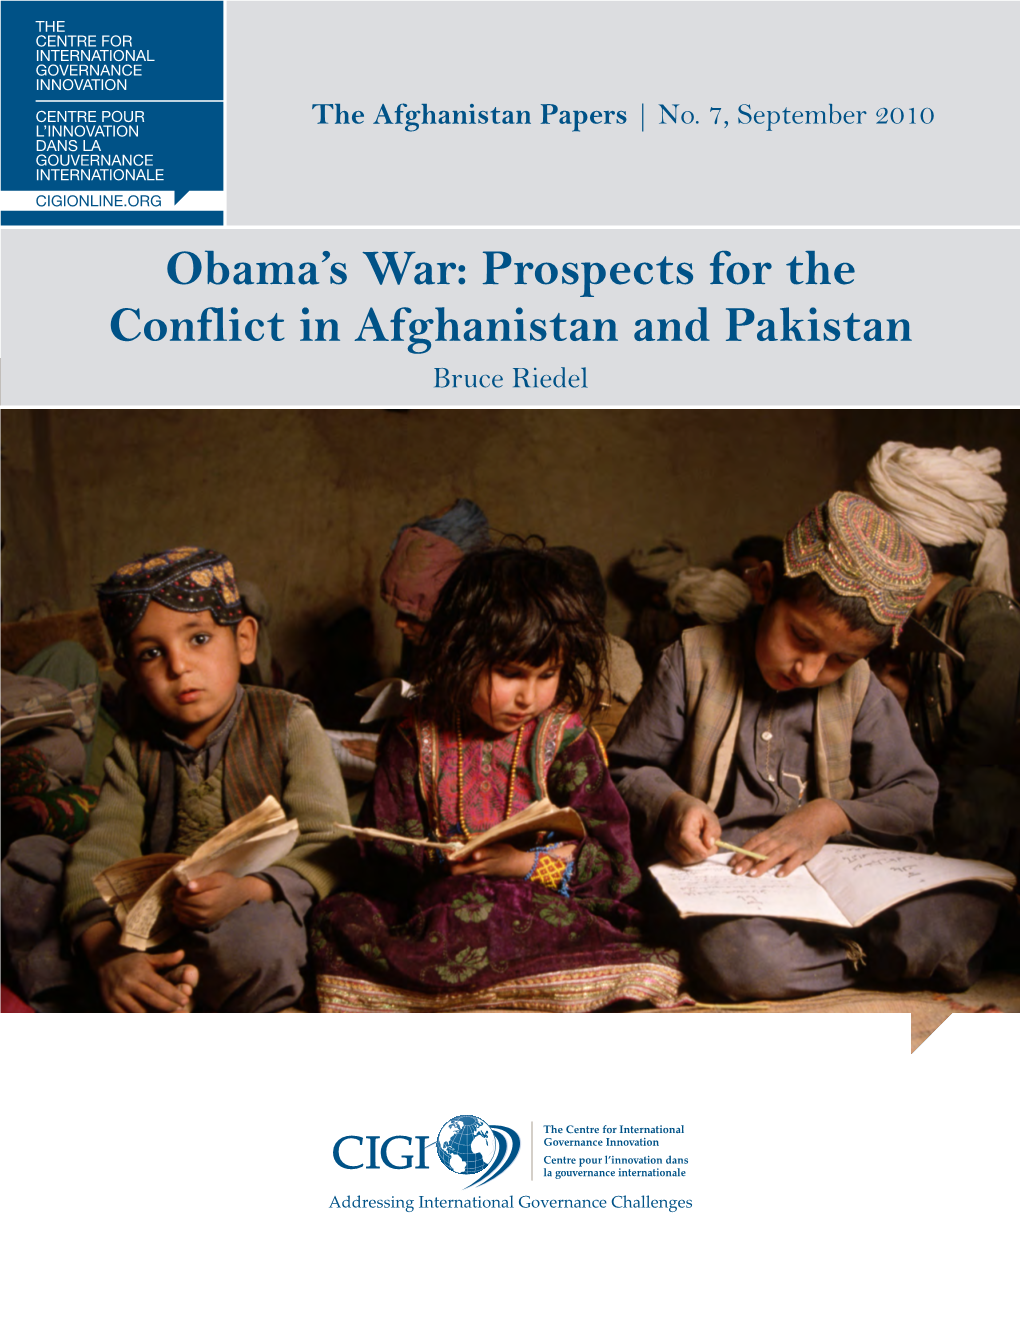 Obama's War: Prospects for the Conflict in Afghanistan and Pakistan